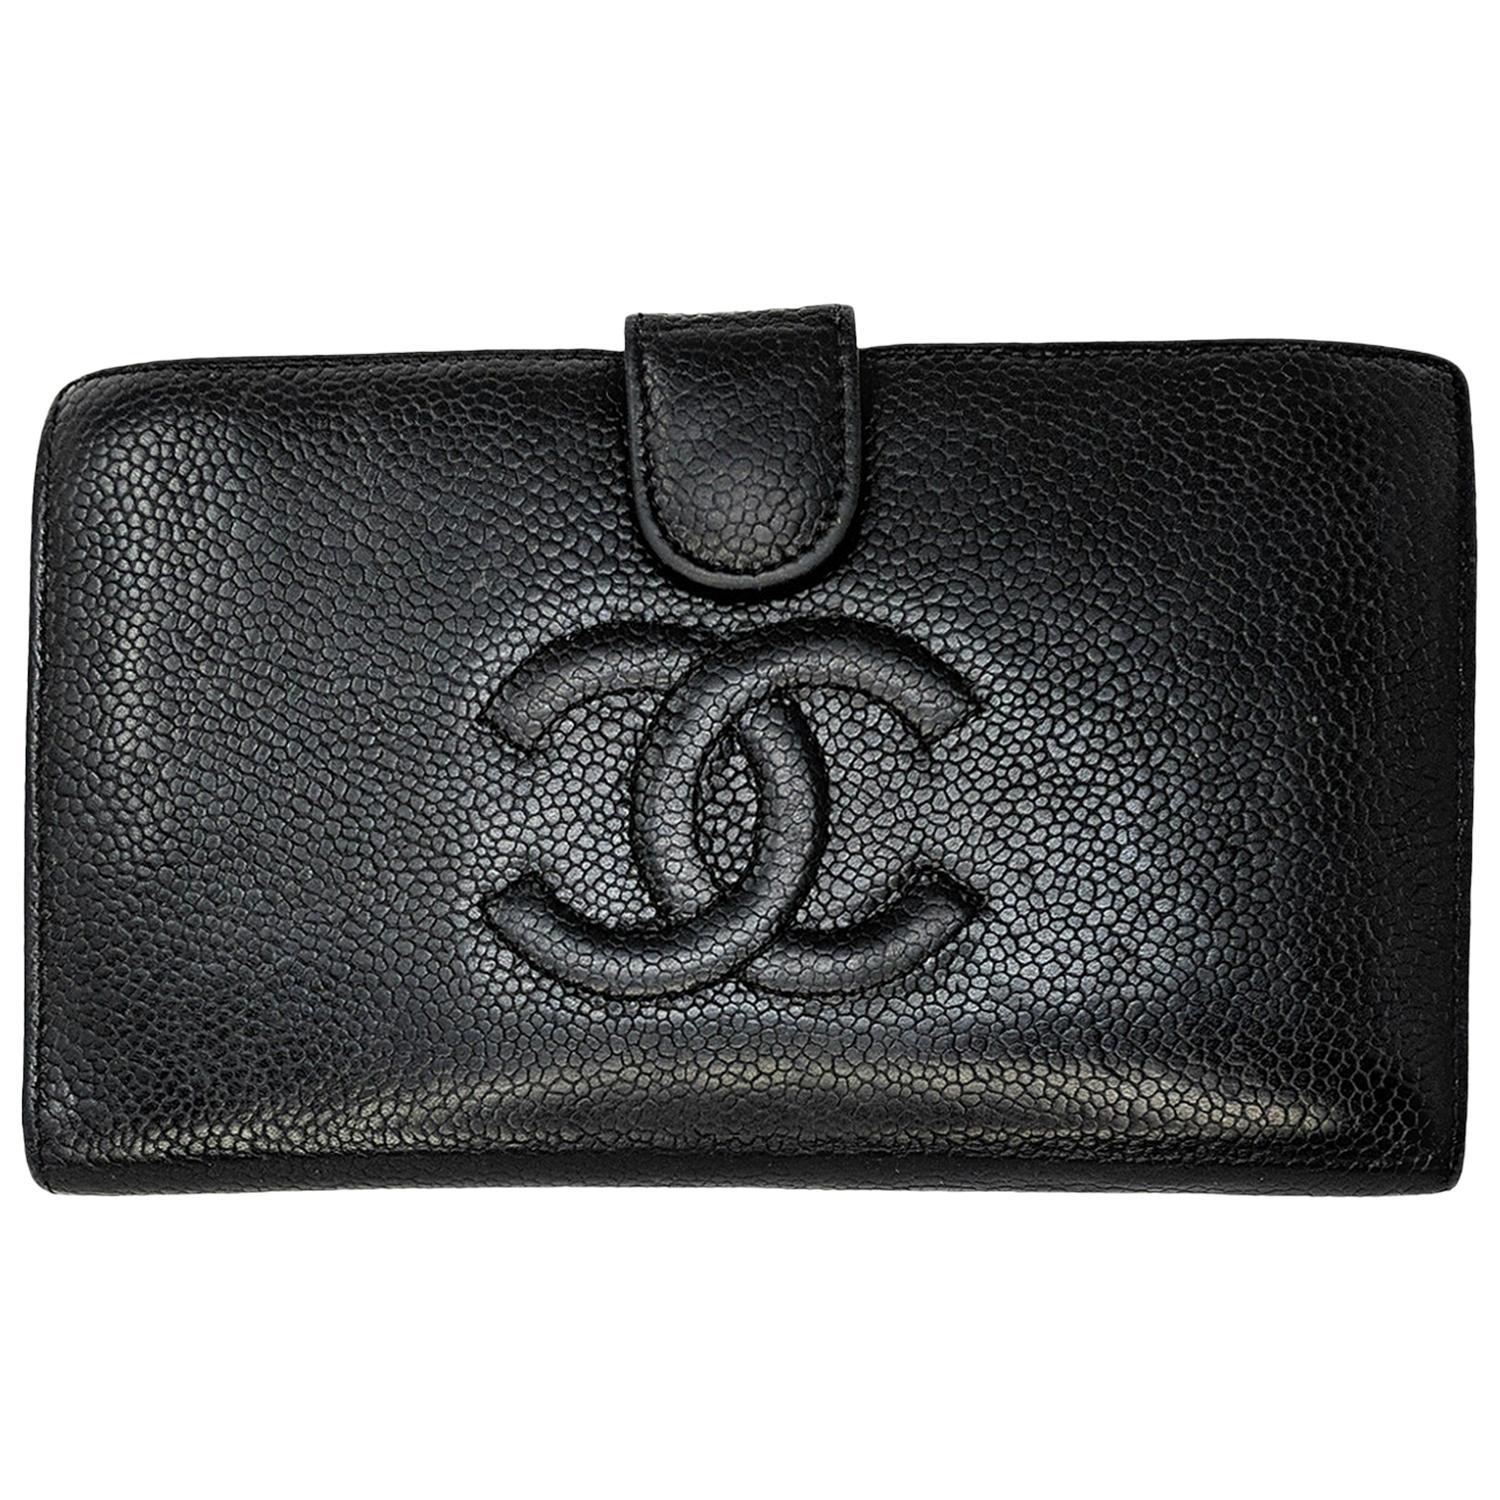 Chanel Vintage Timeless French Purse Wallet